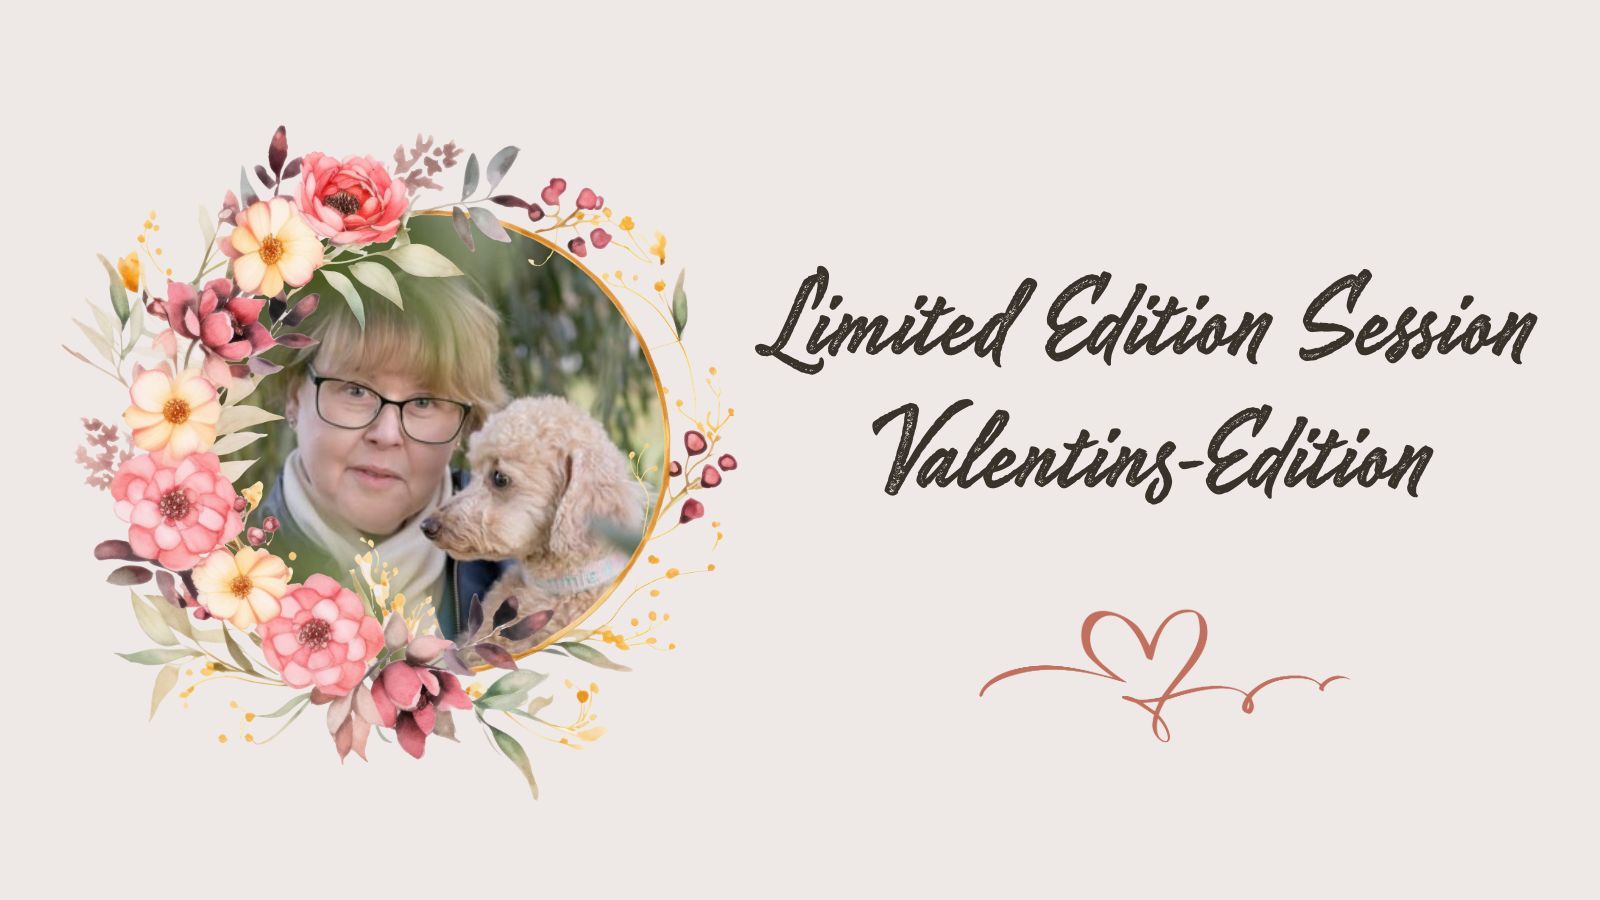 Limited Edition Session Valentins-Edition